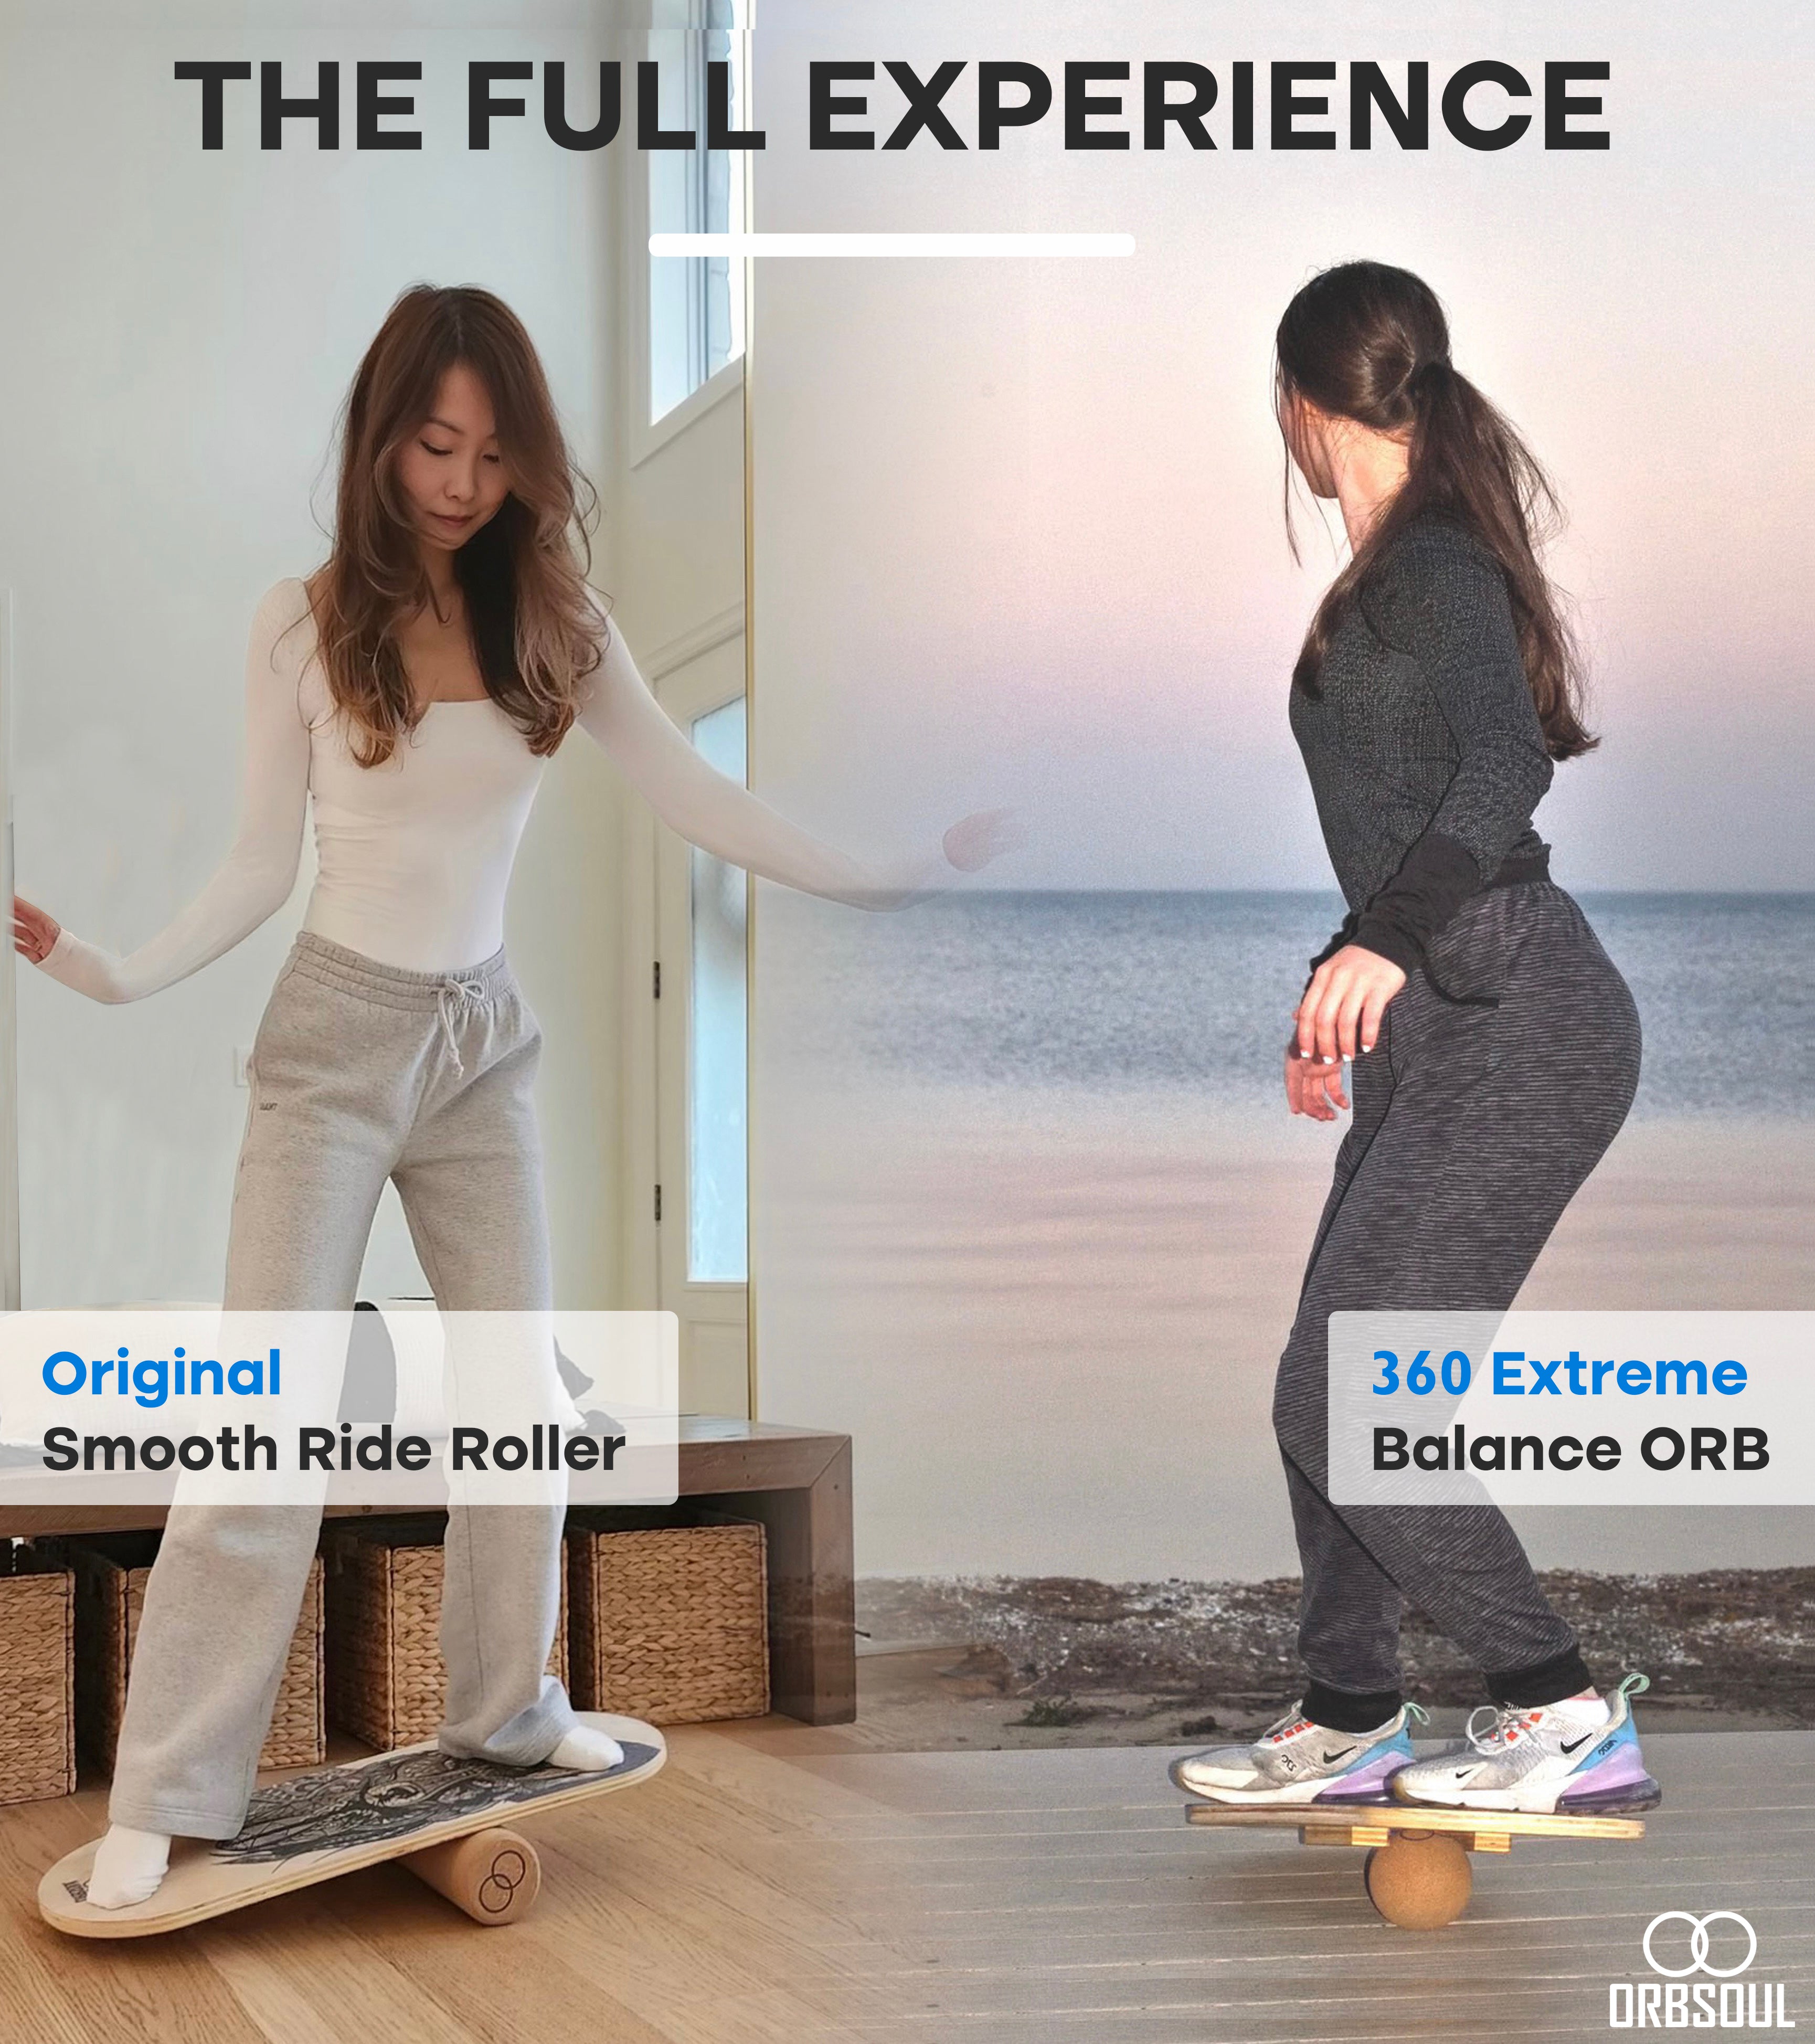 orbsoul core pro balance board. Women on balance board using the 2 rollers included. The original smooth ride roller and extreme balance orb.